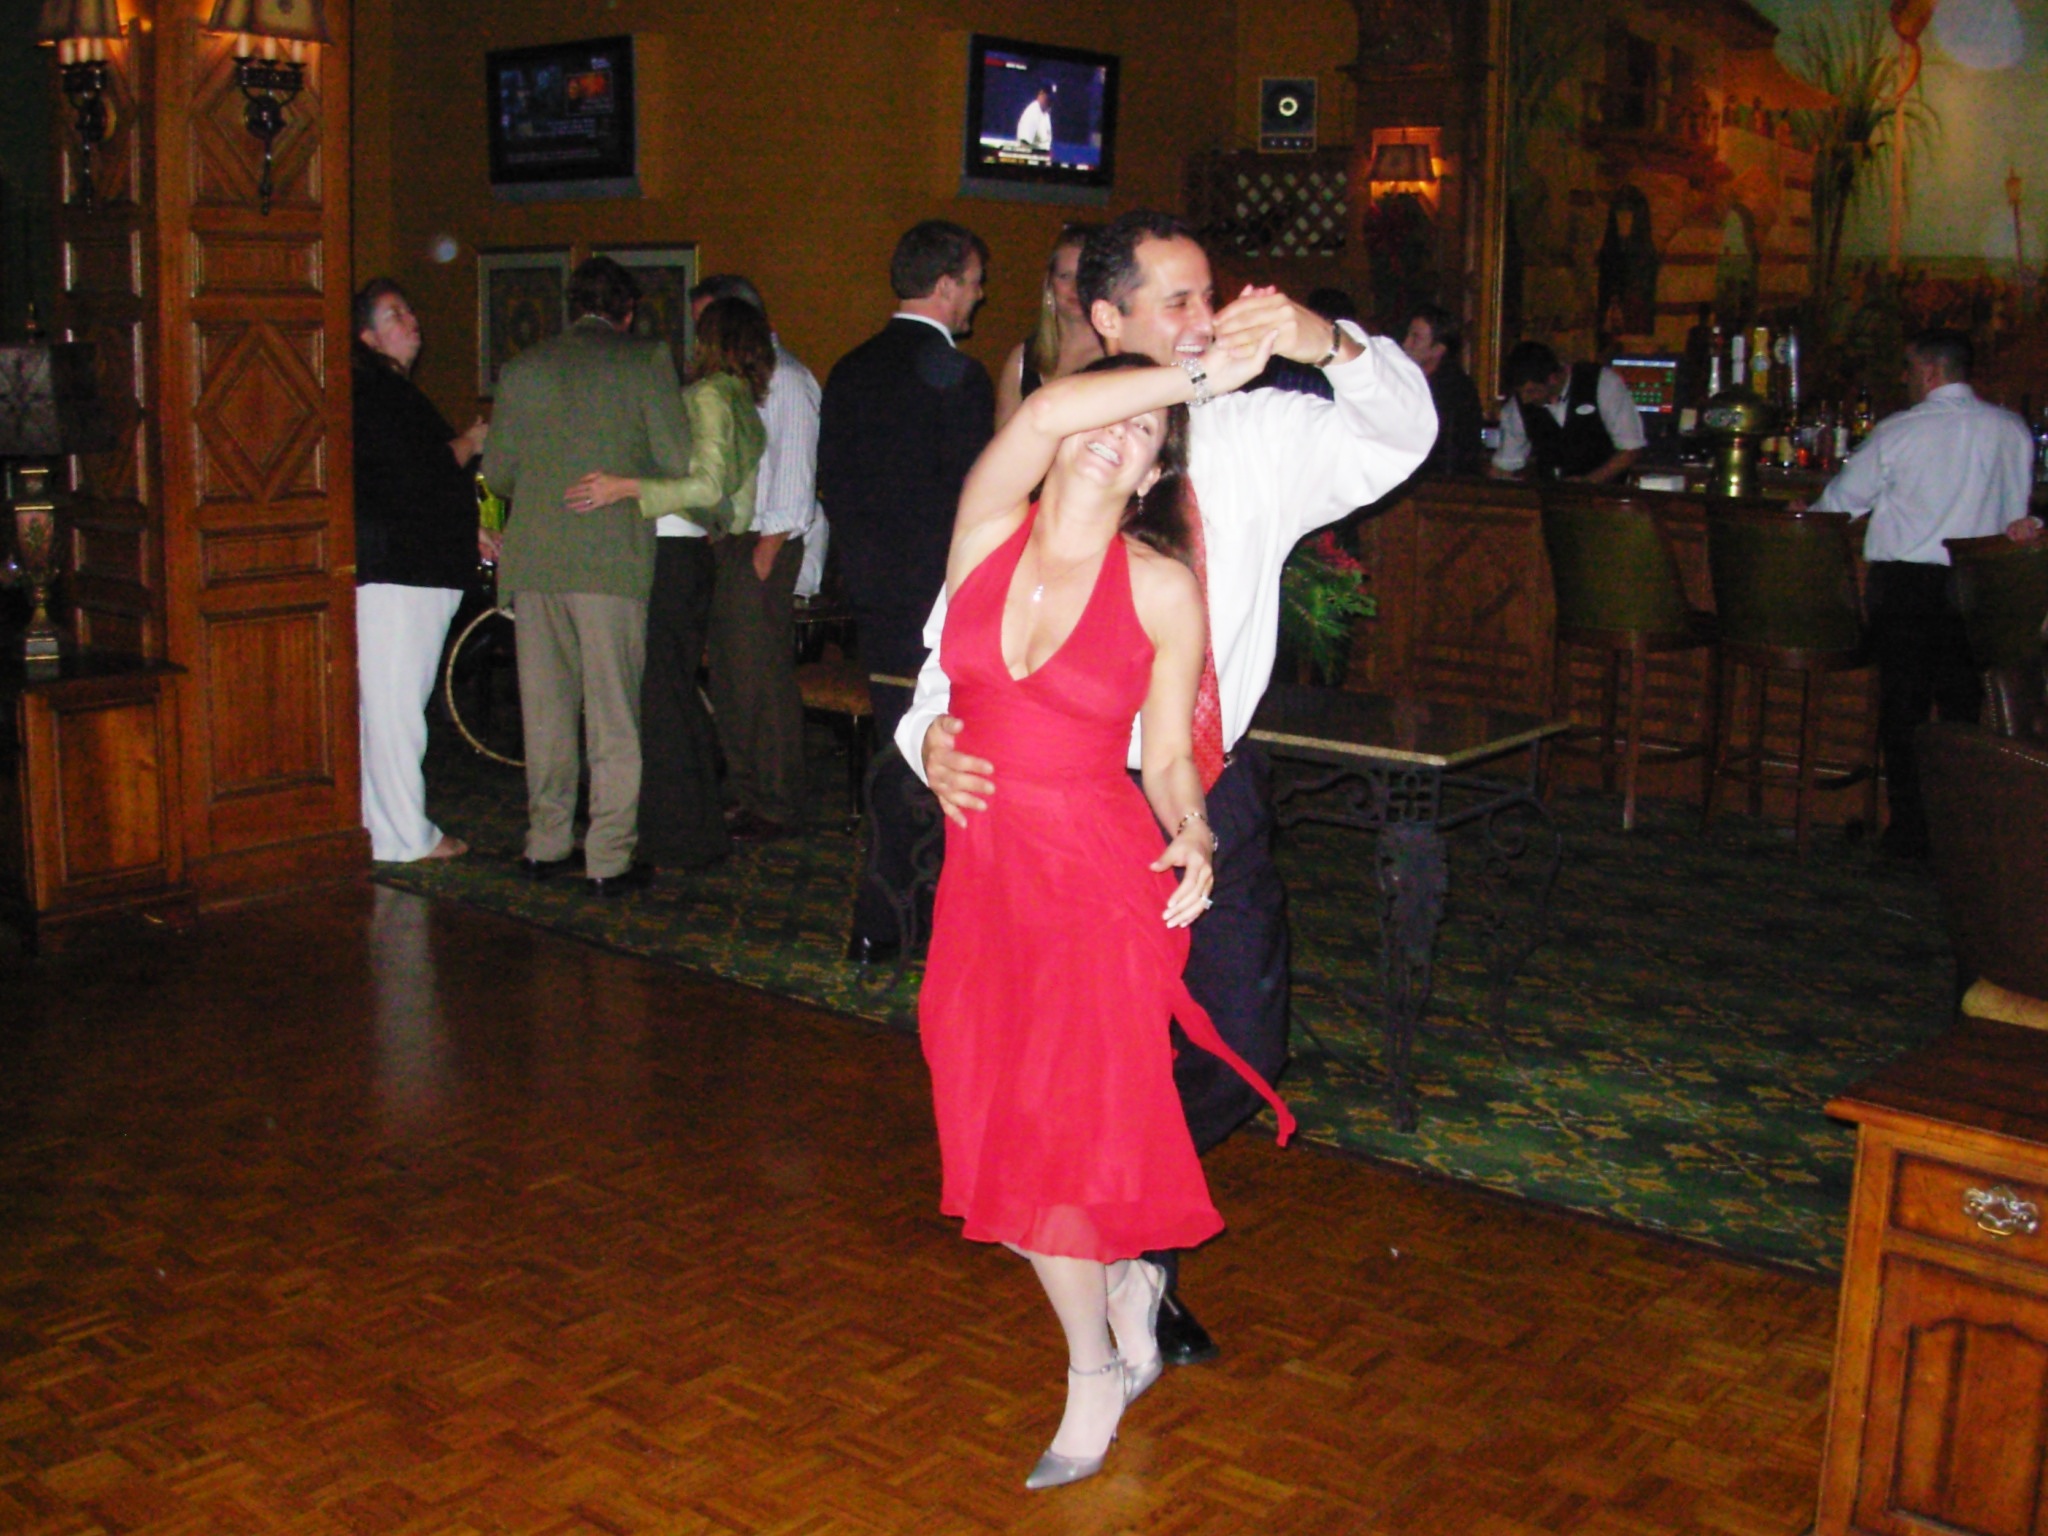 I could have danced all night!!!
Swinging at the Hotel Hershey...the last dancers of the evening
